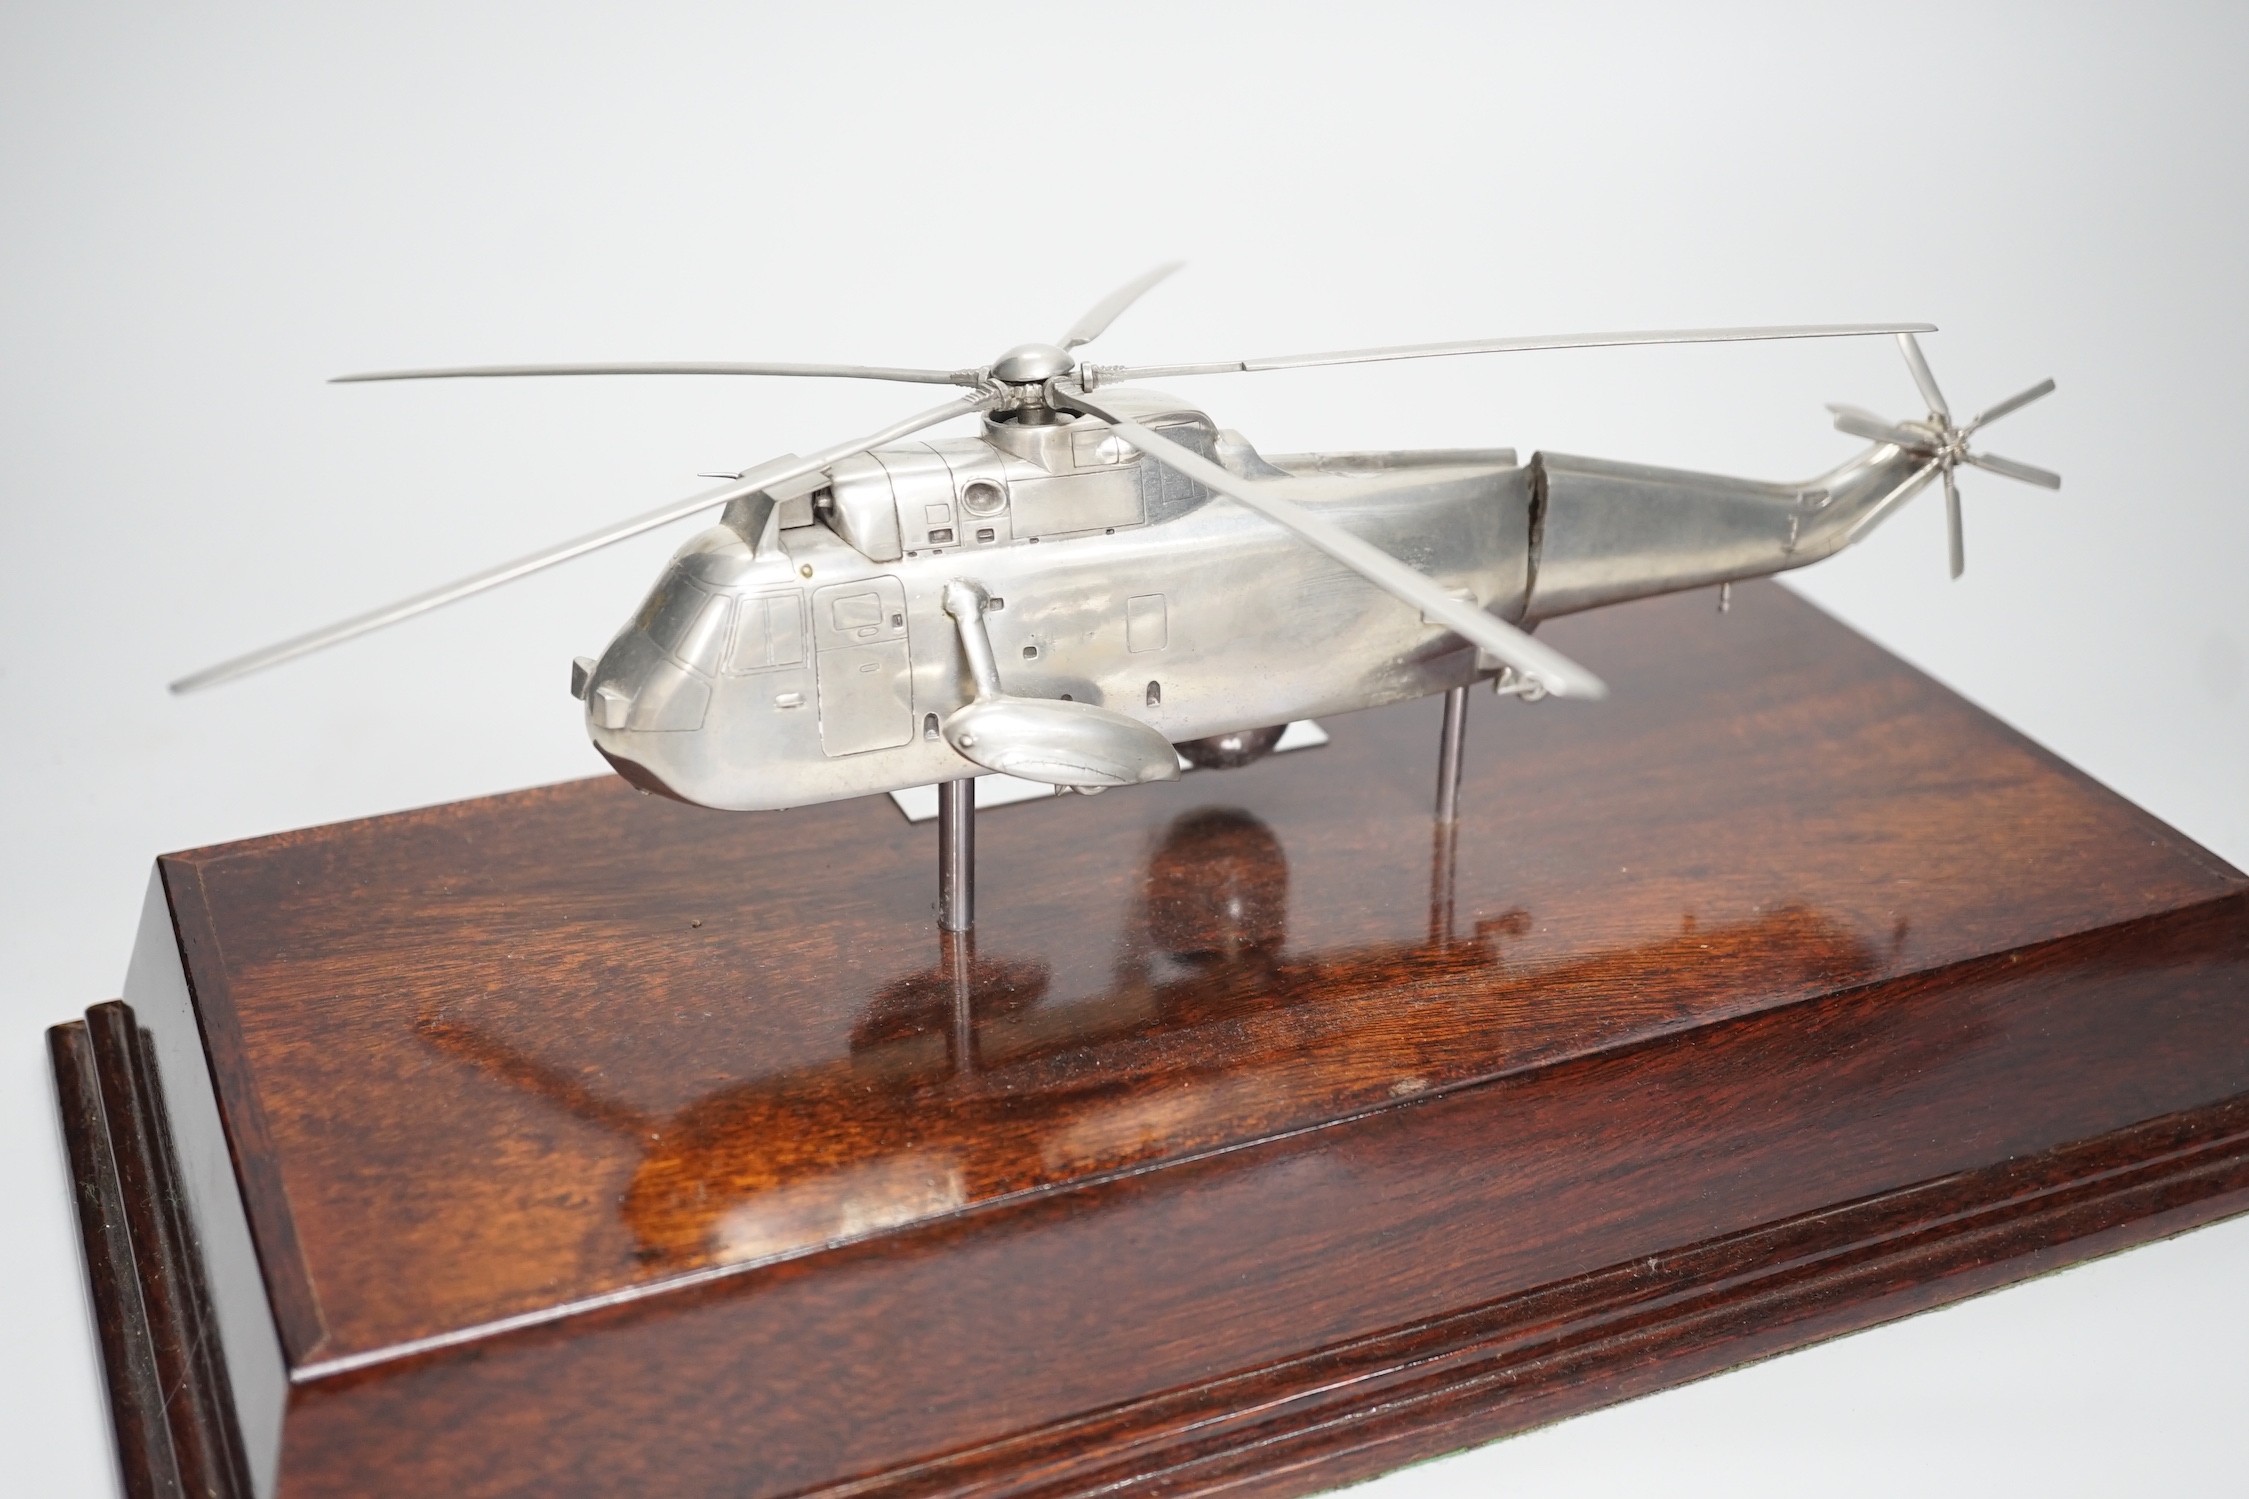 A model of a Sea King helicopter by Brian Banbury, with original case, Helicopter stand 34cm long